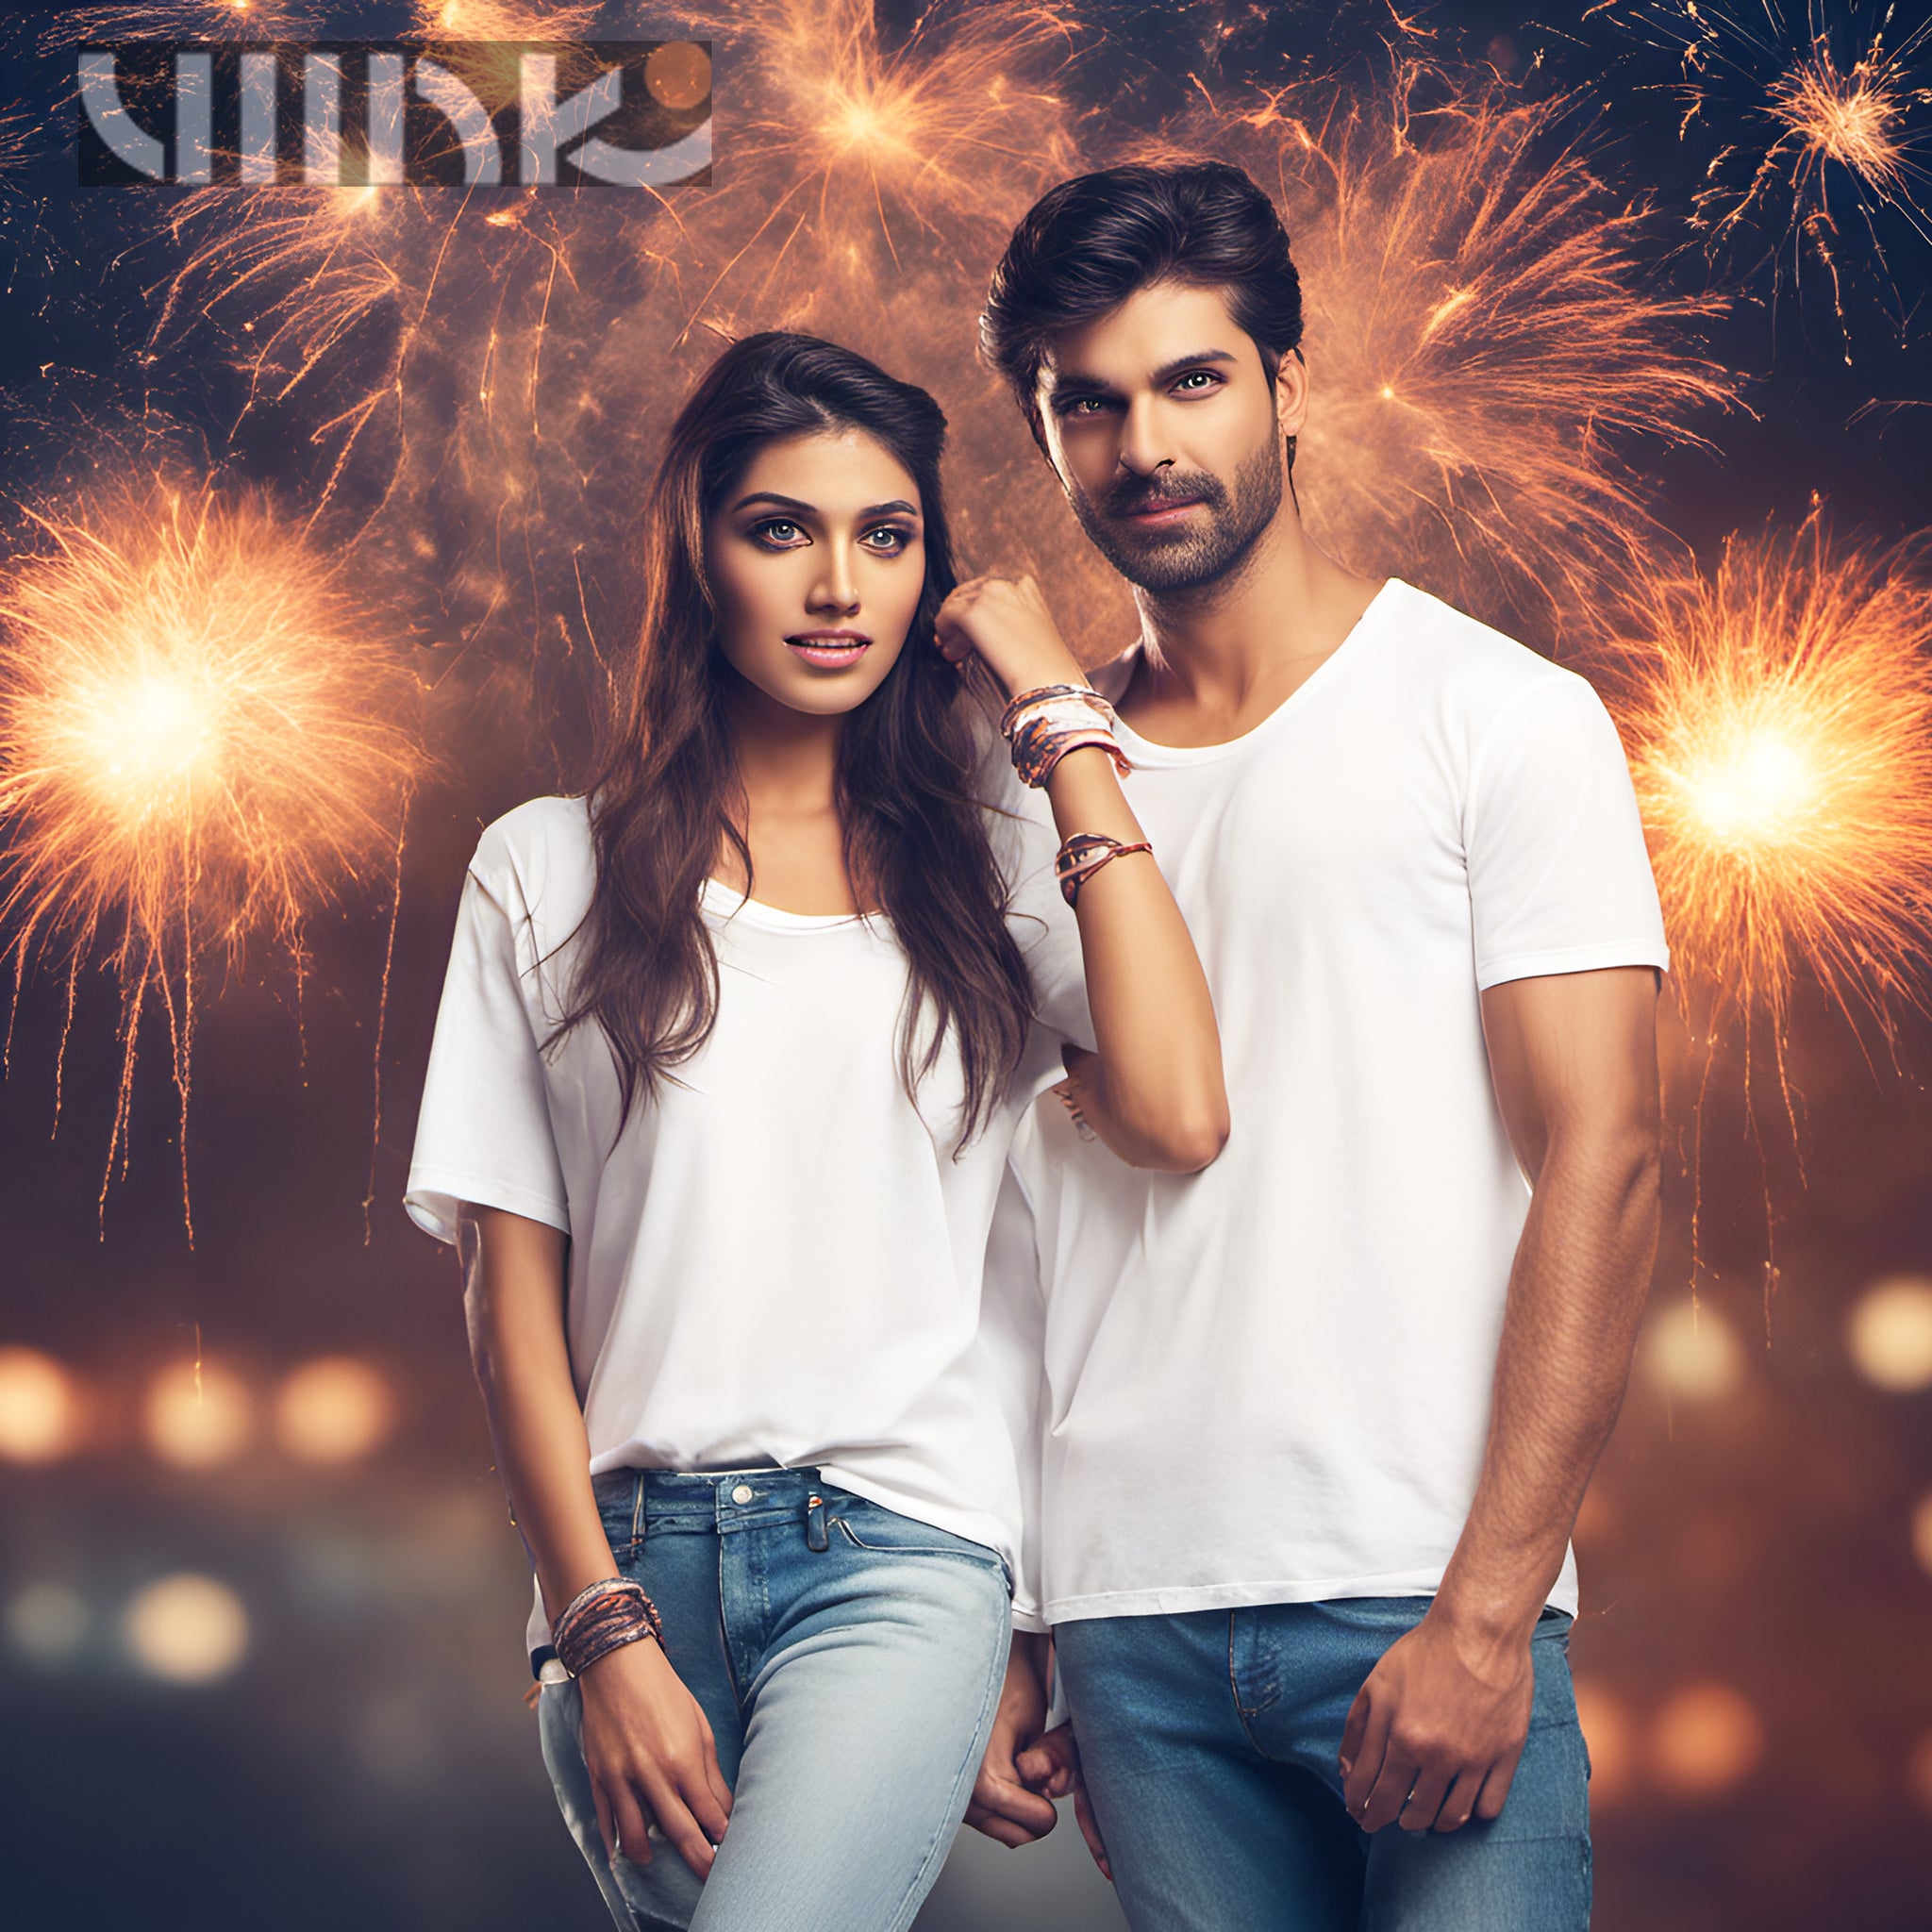 The Diwali Fashion Revolution: Viink Oversized T-Shirts Meet Festive Vibes! 🎆 When Modern Trends Light Up Traditional Celebrations 🌟